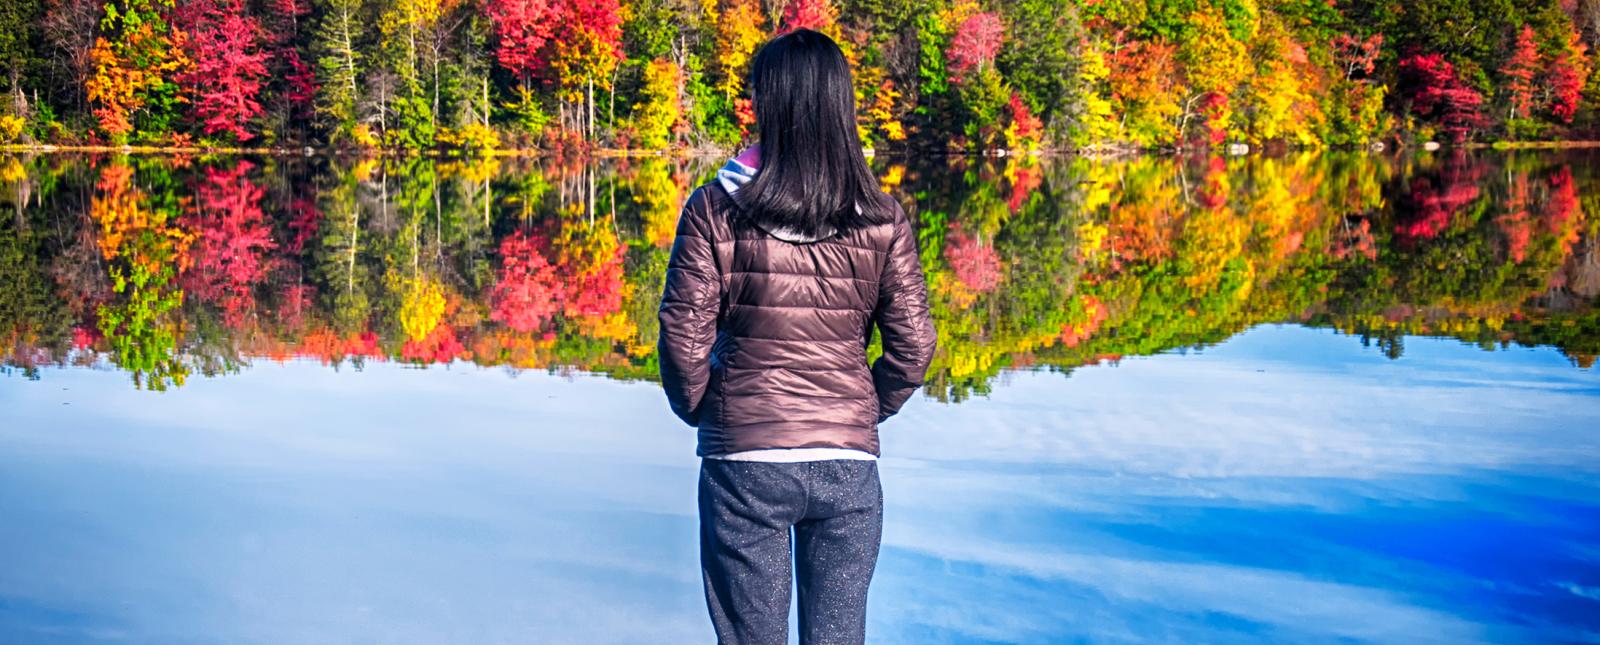 Young woman overlooking Burr Pond during Fall foliage